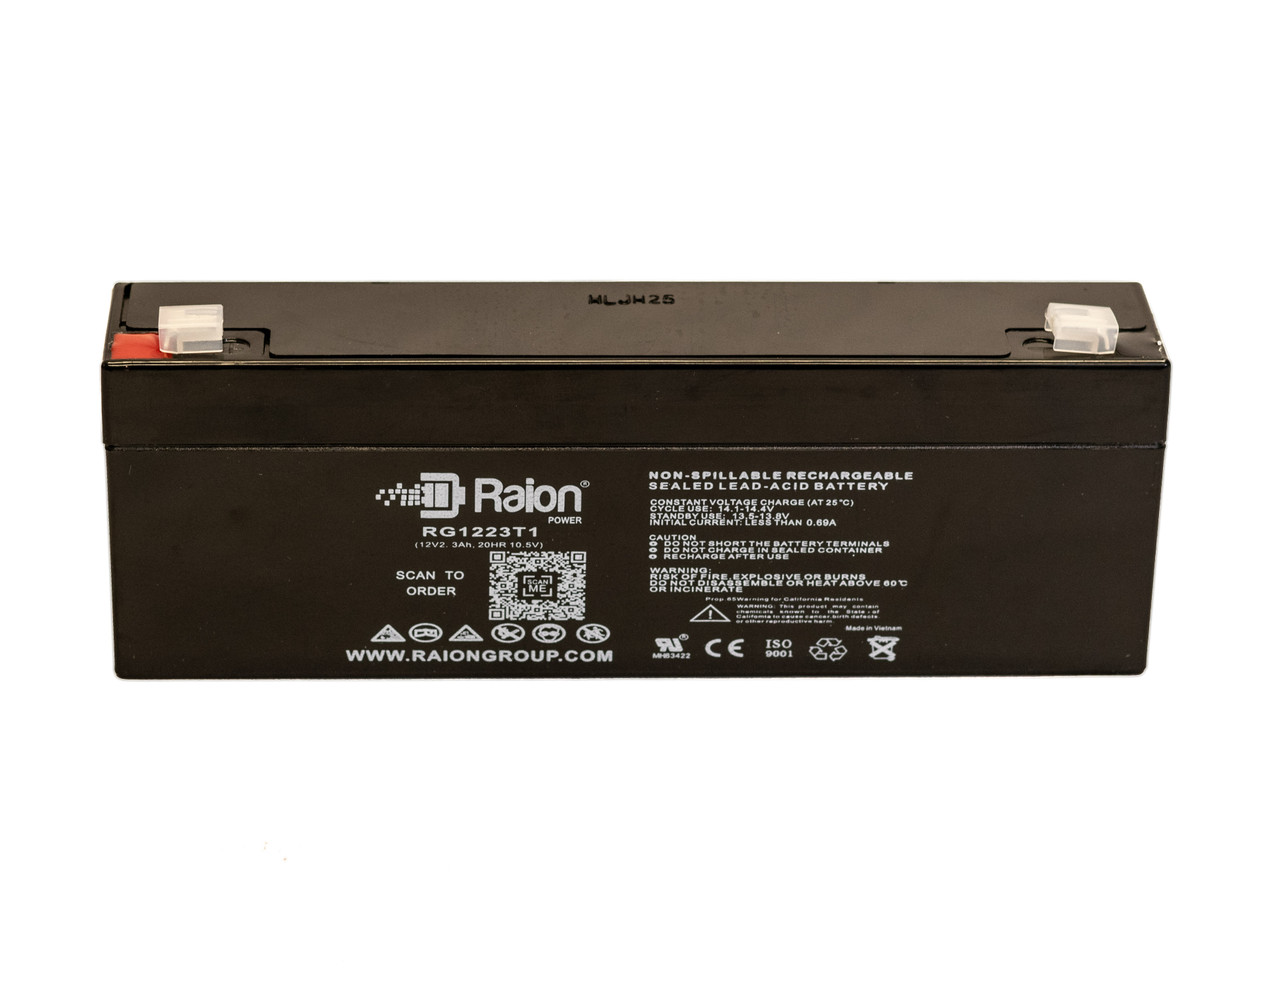 Raion Power 12V 2.3Ah SLA Battery With T1 Terminals For Kontron 7143 Recorder